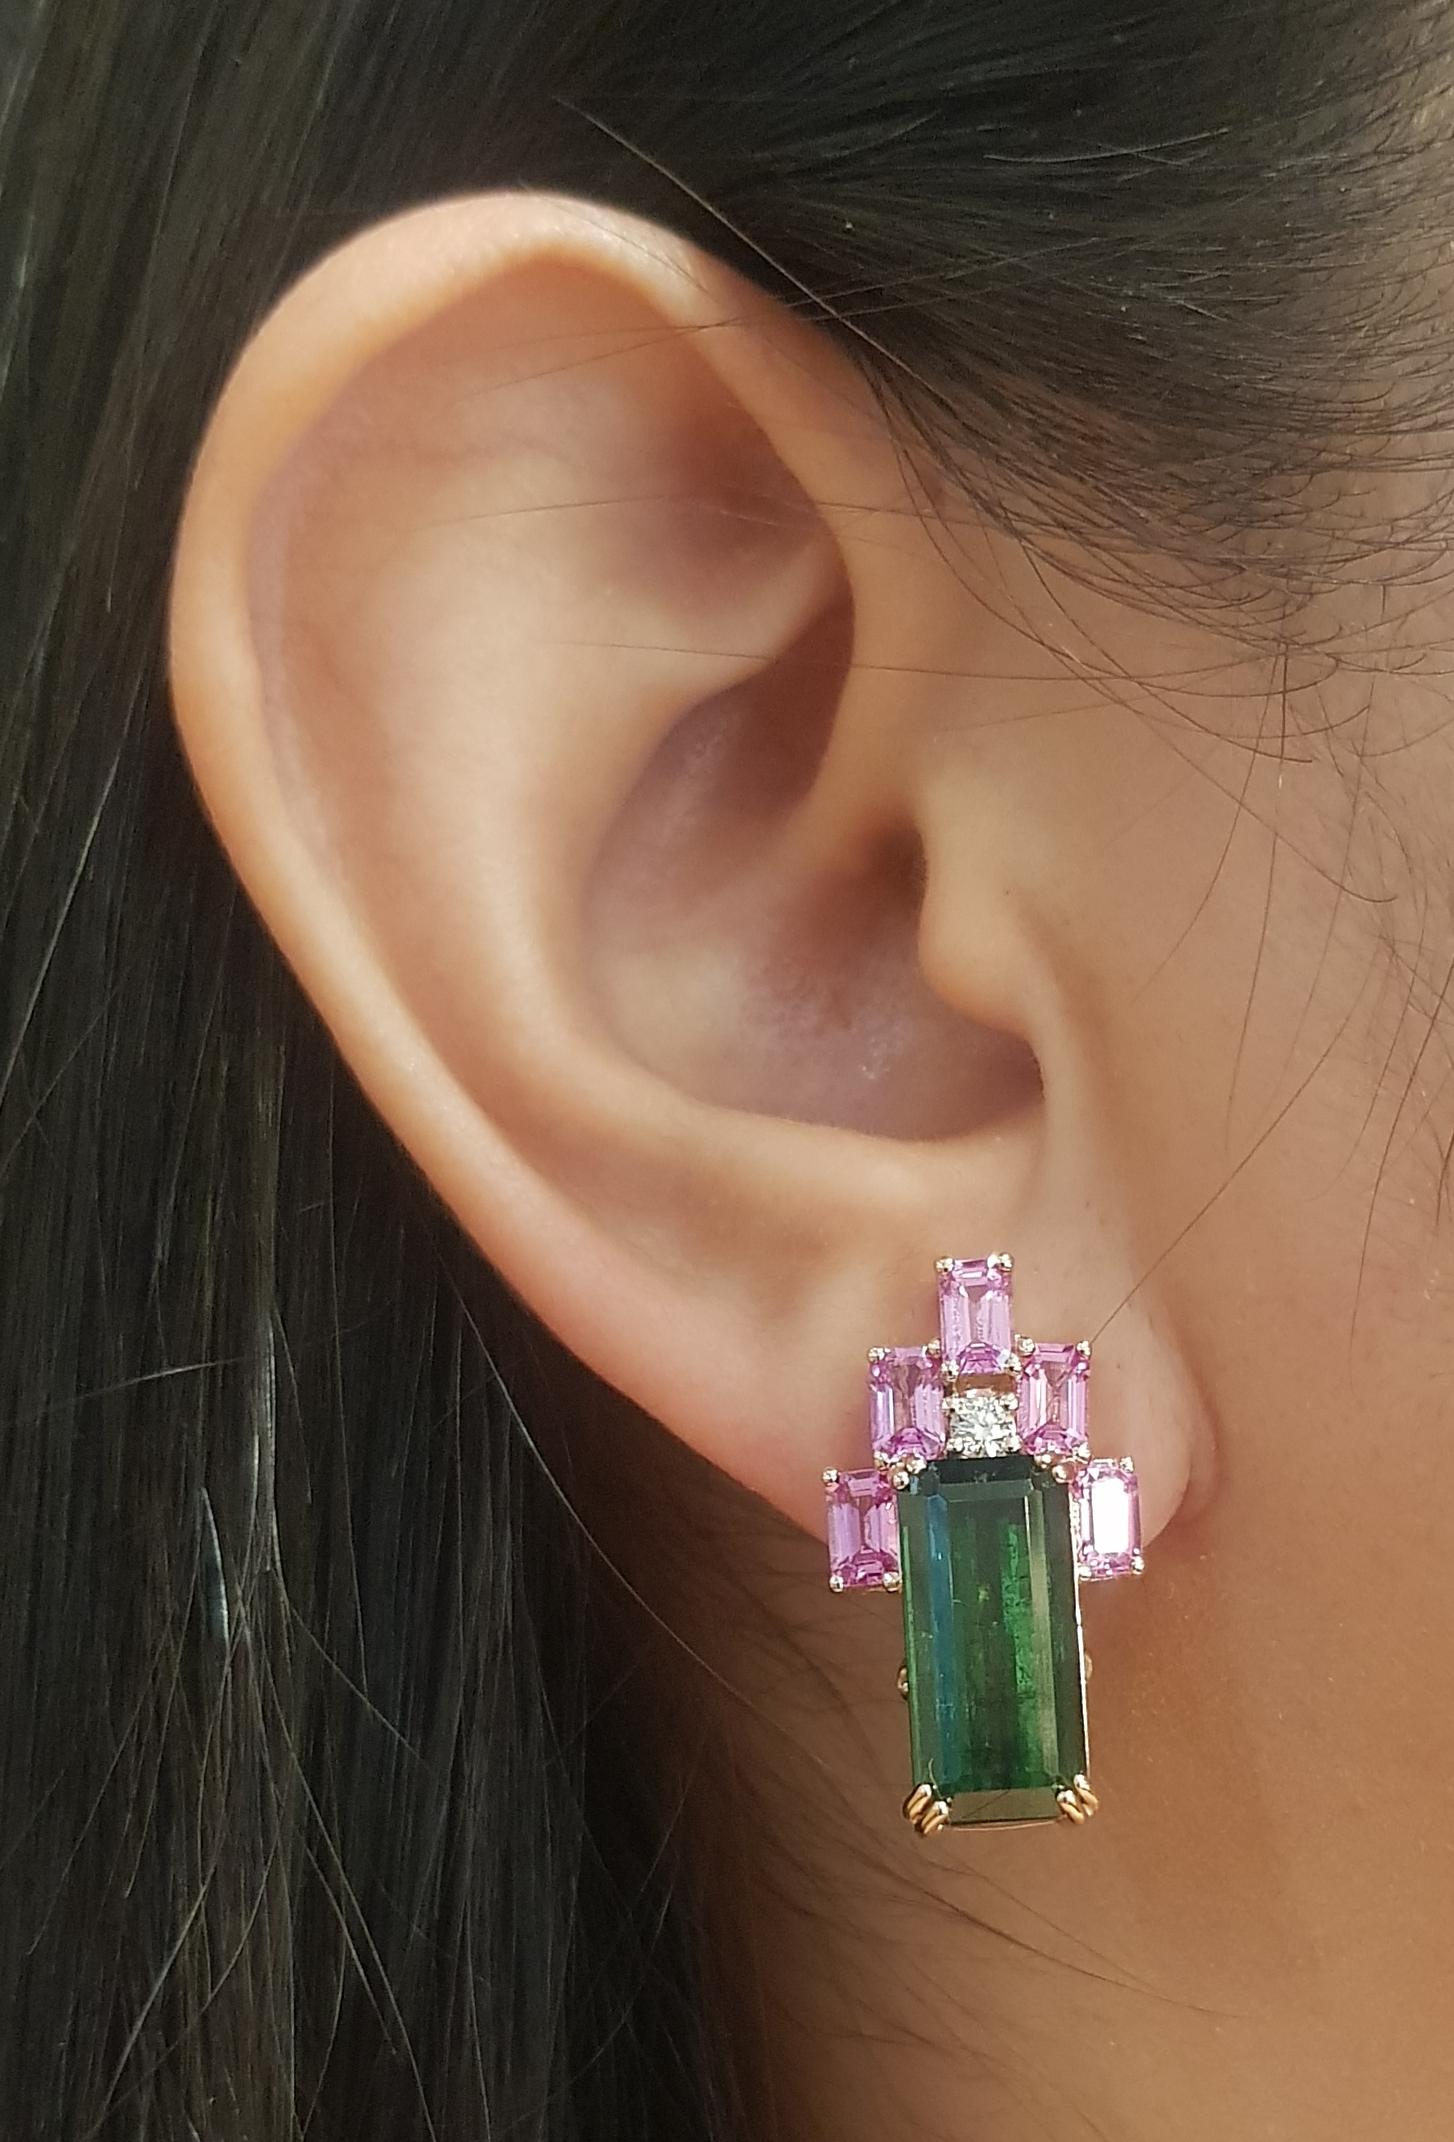 Green Tourmaline 12.44 carats, Pink Sapphire 3.55 carats and Diamond 0.13 carat Earrings set in 18K Rose Gold Settings

Width: 1.3 cm 
Length: 2.5 cm
Total Weight: 12.65 grams

